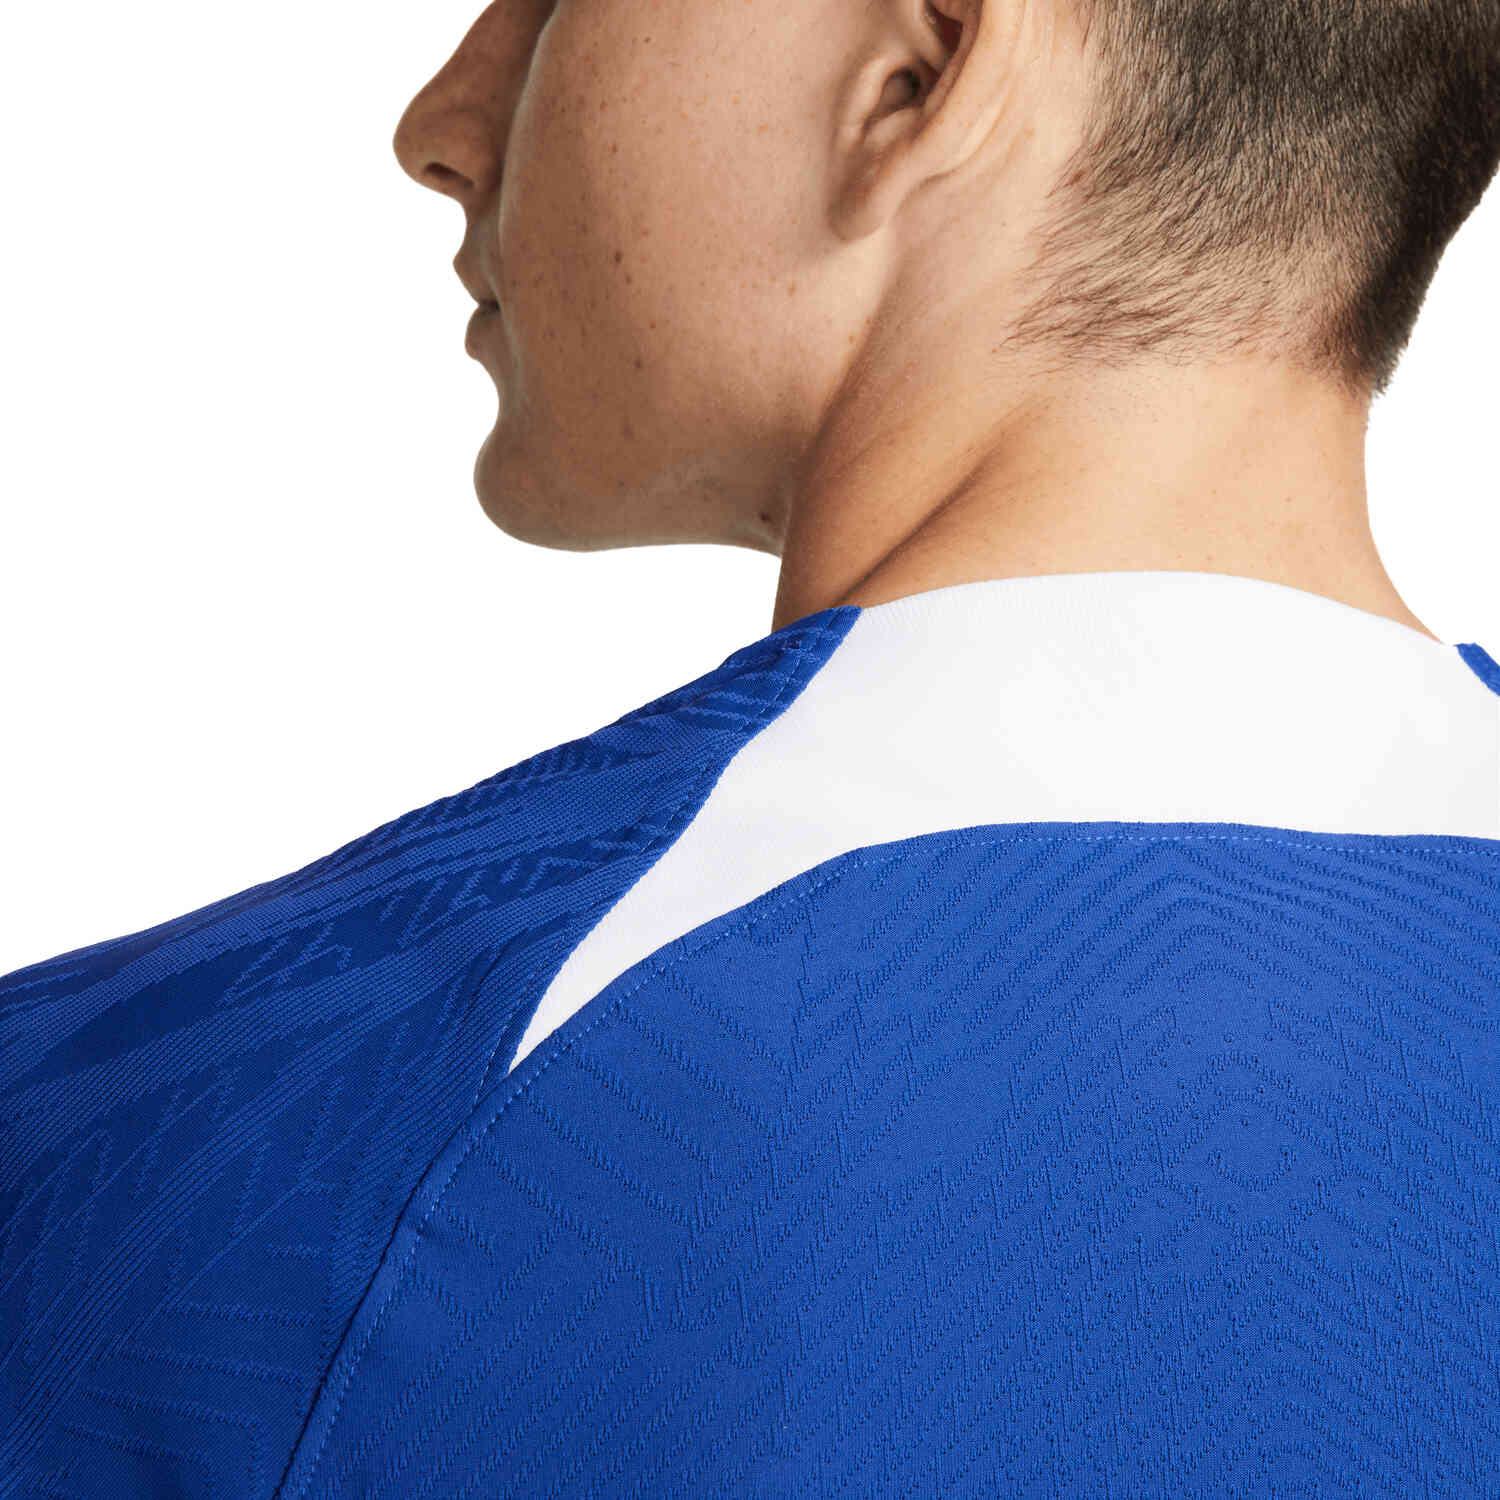 Nike Chelsea Home Match Jersey – 2023/24